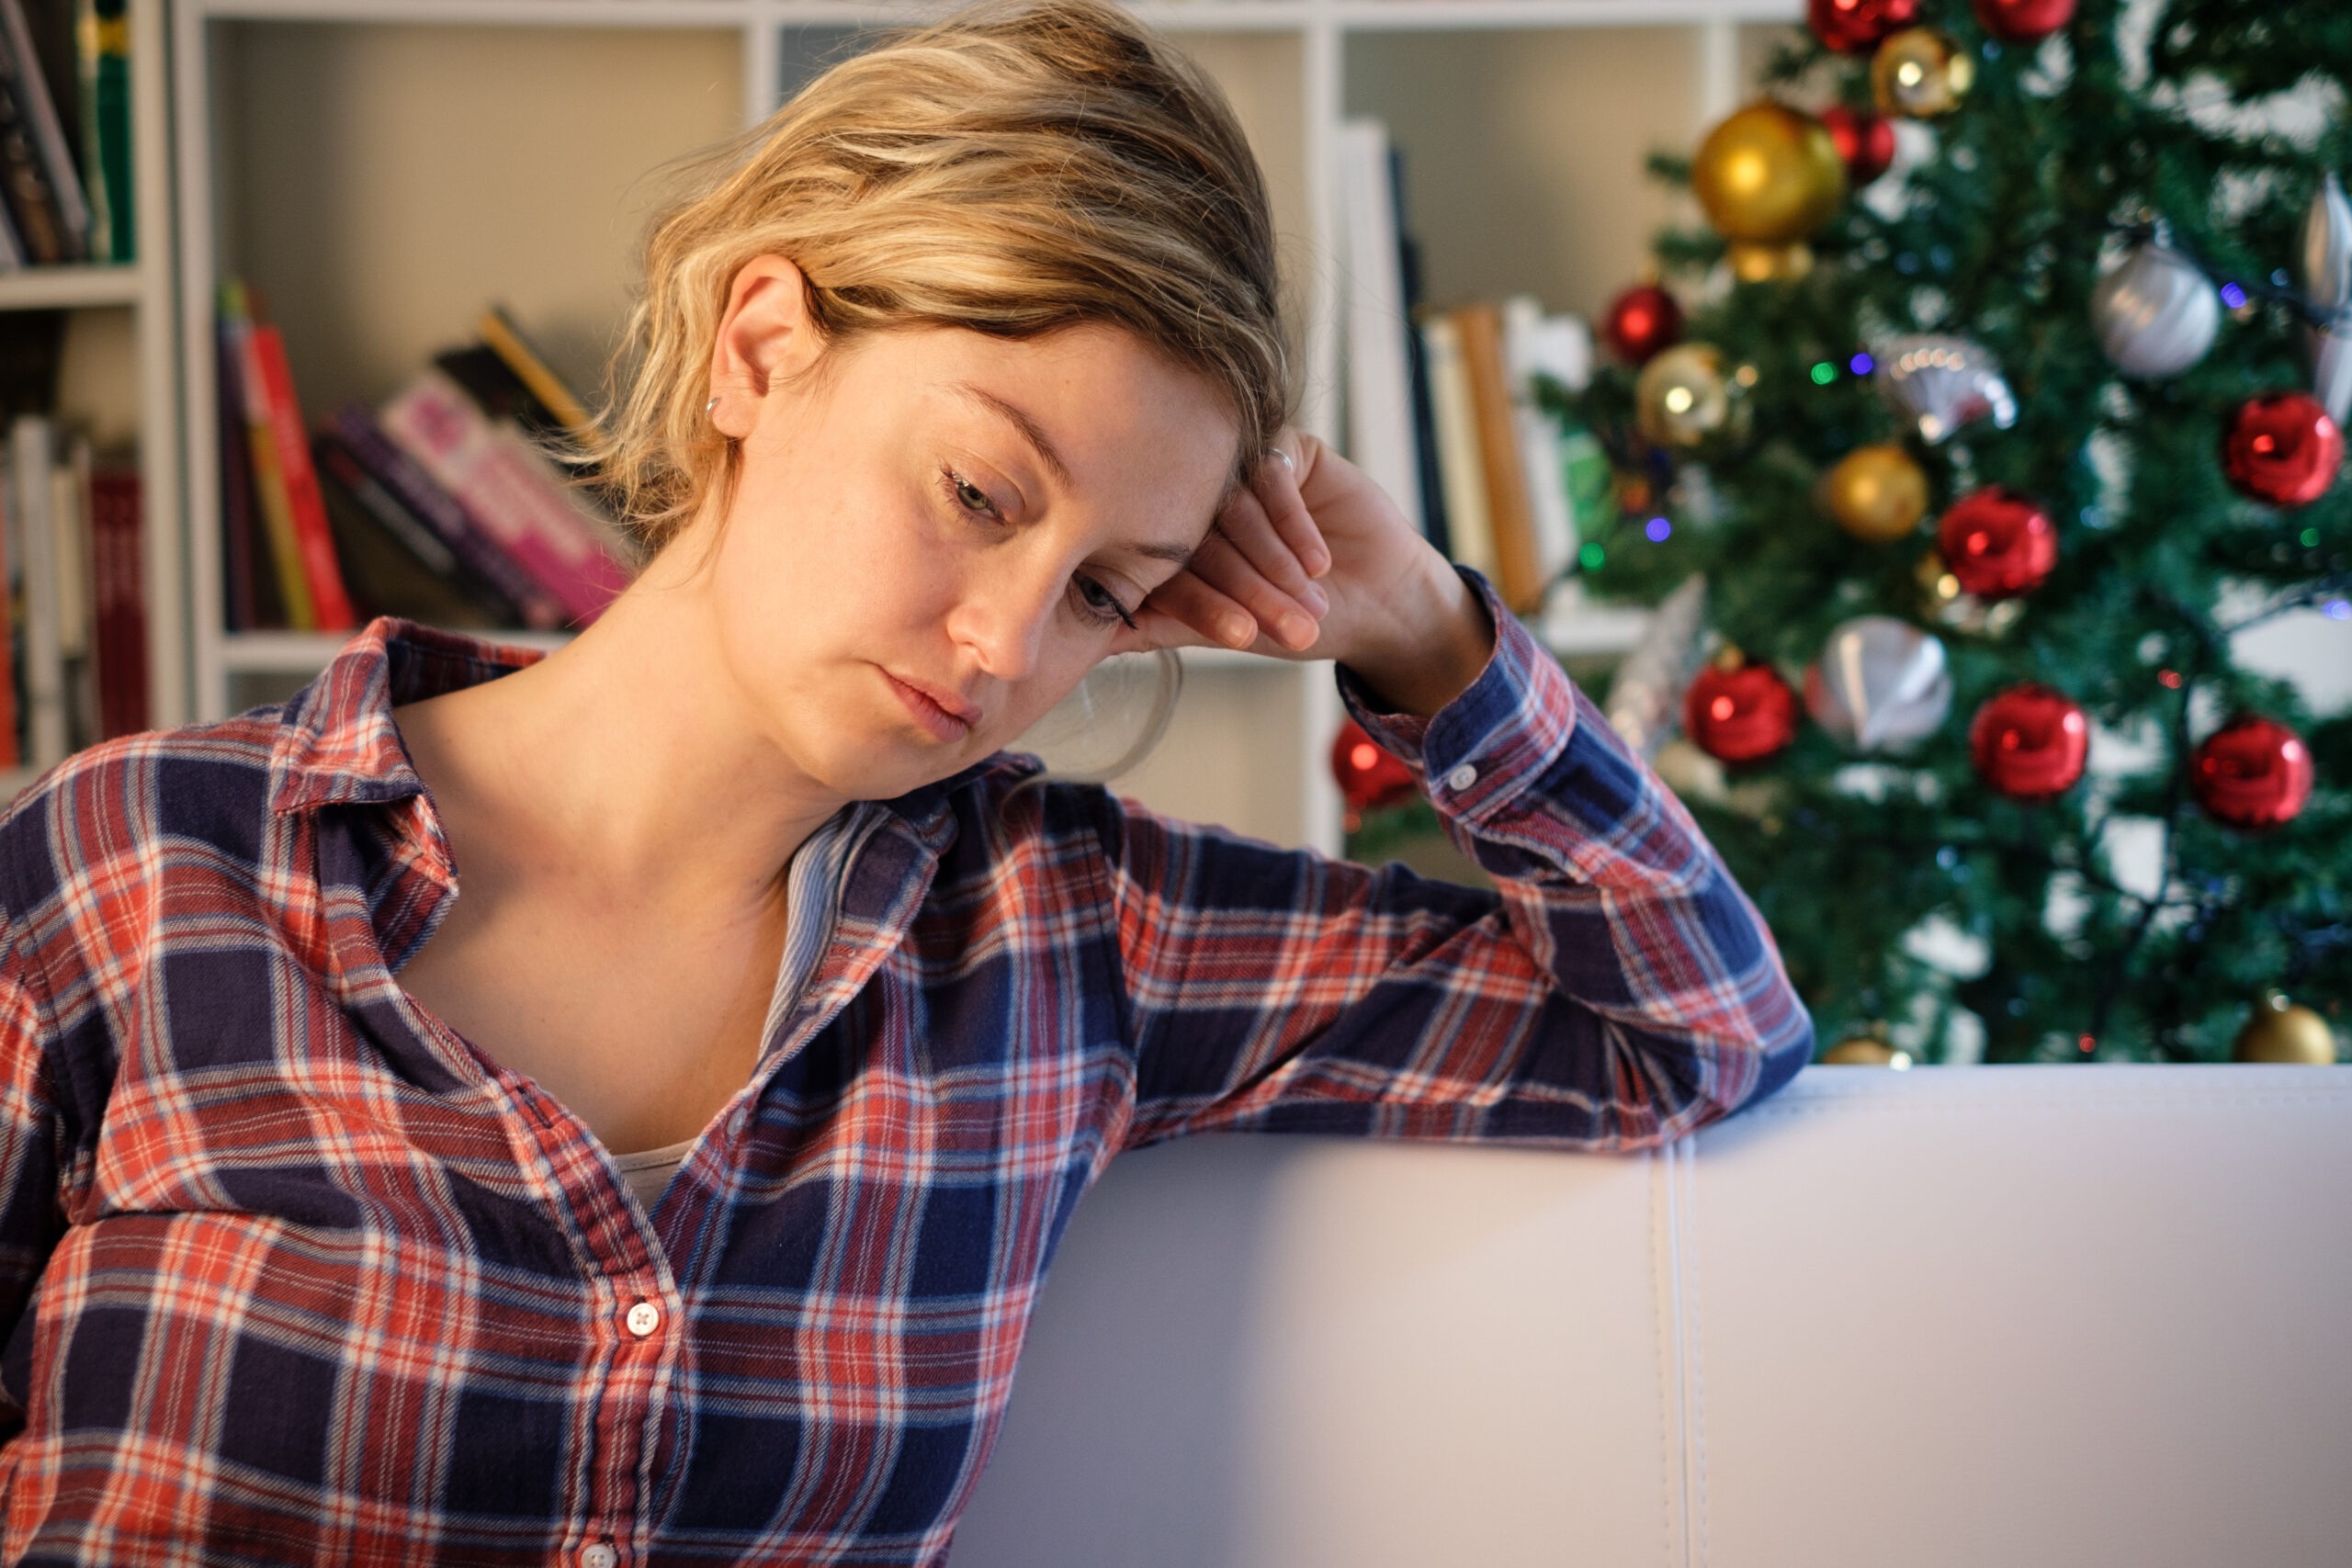 A woman in a plaid flannel sits on a couch in front of a Christmas tree. Her head leans against her hand as she stares sadly toward the ground, portraying the complexity of grieving during the holidays.